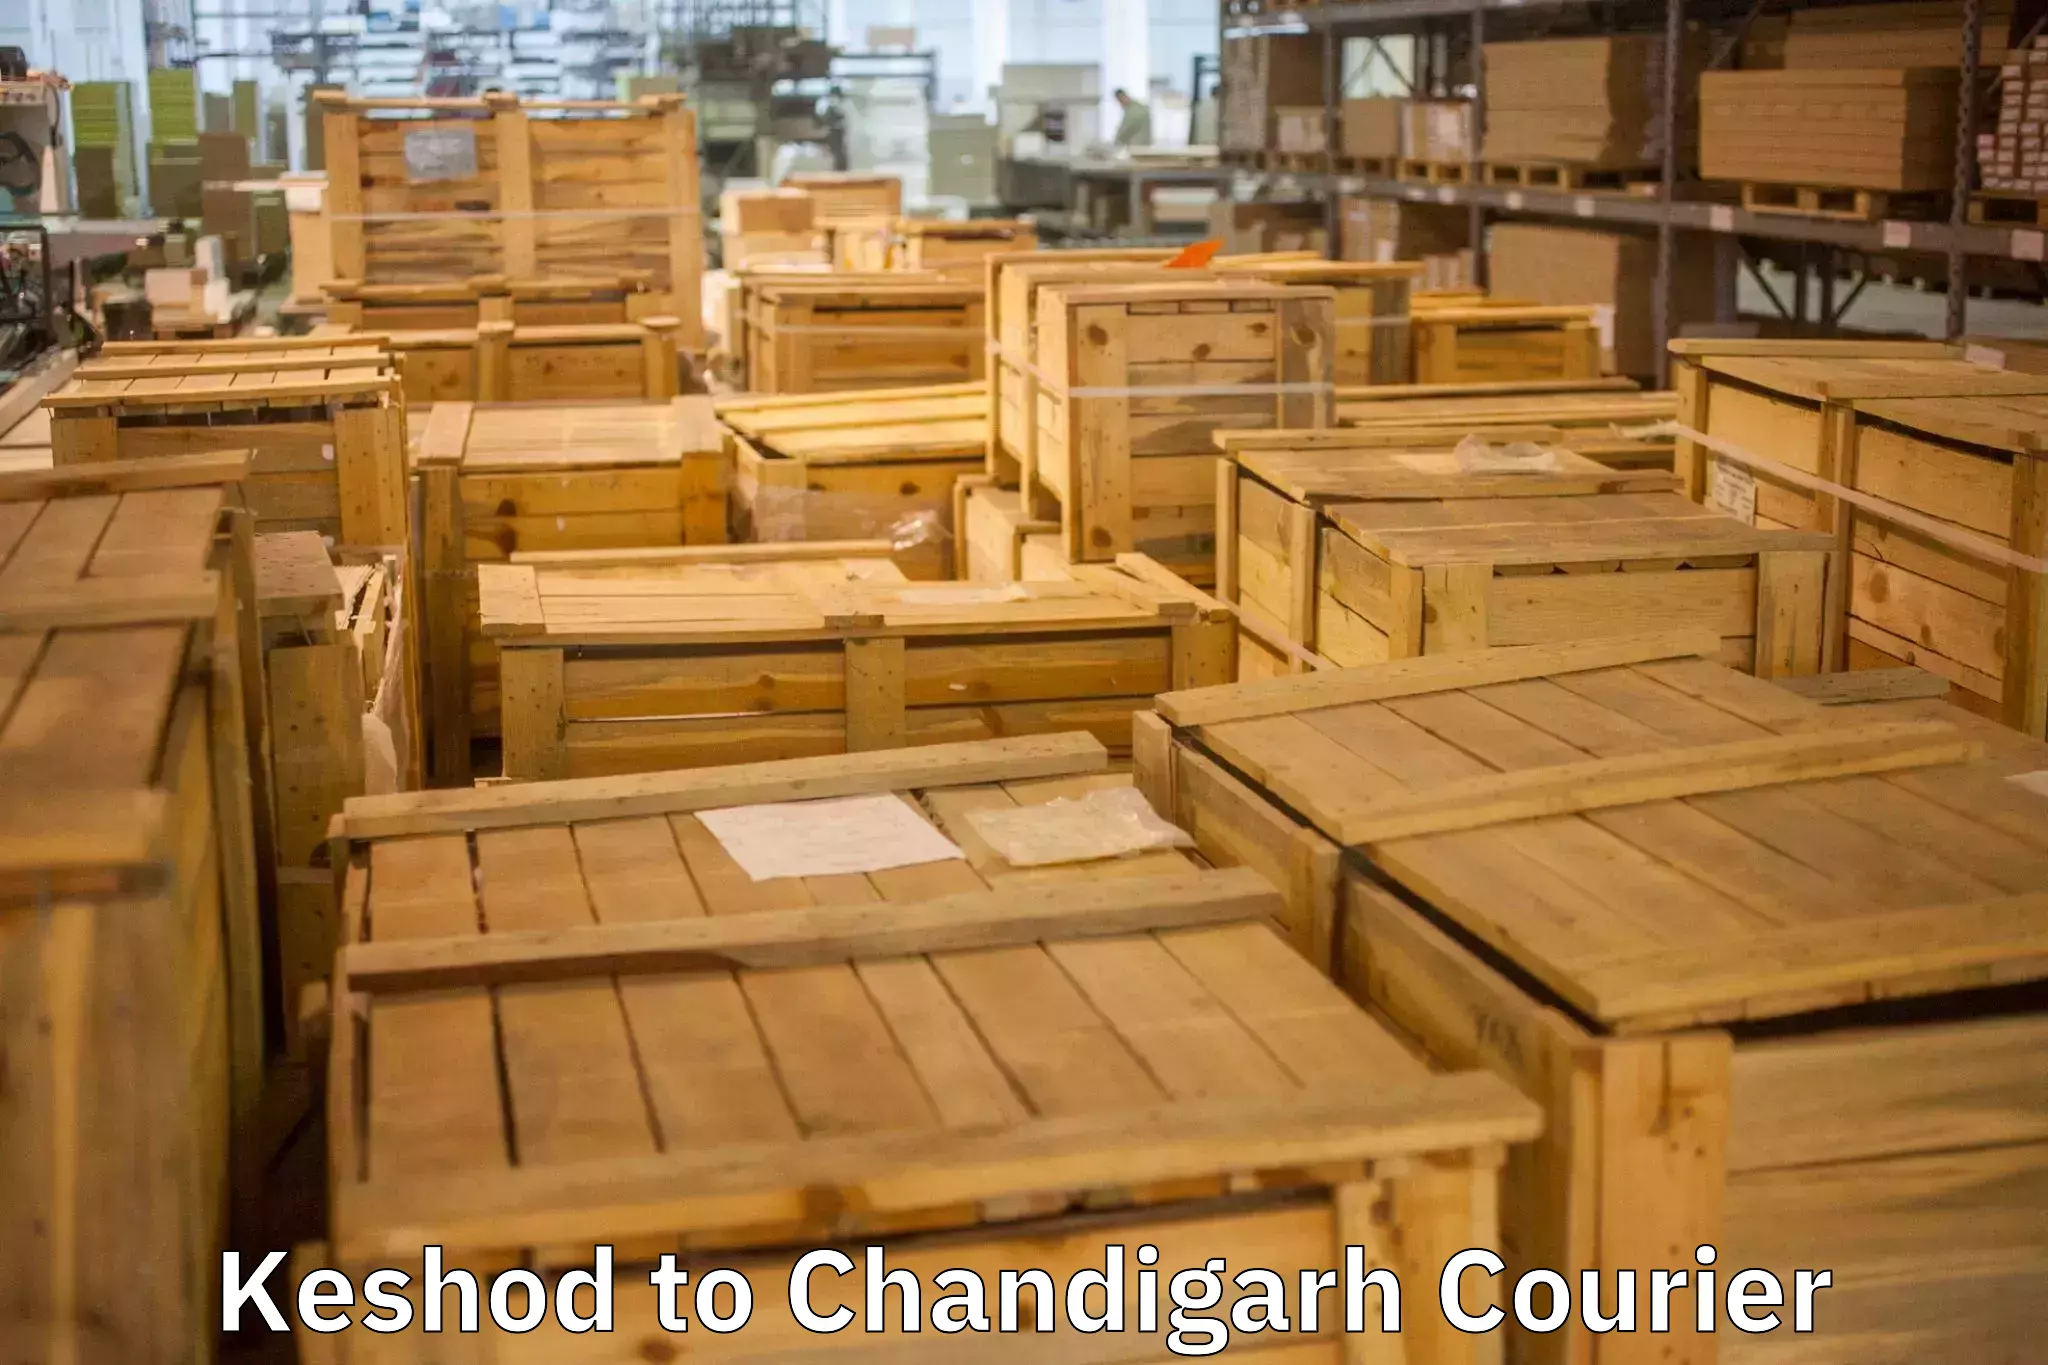 Specialized moving company Keshod to Chandigarh